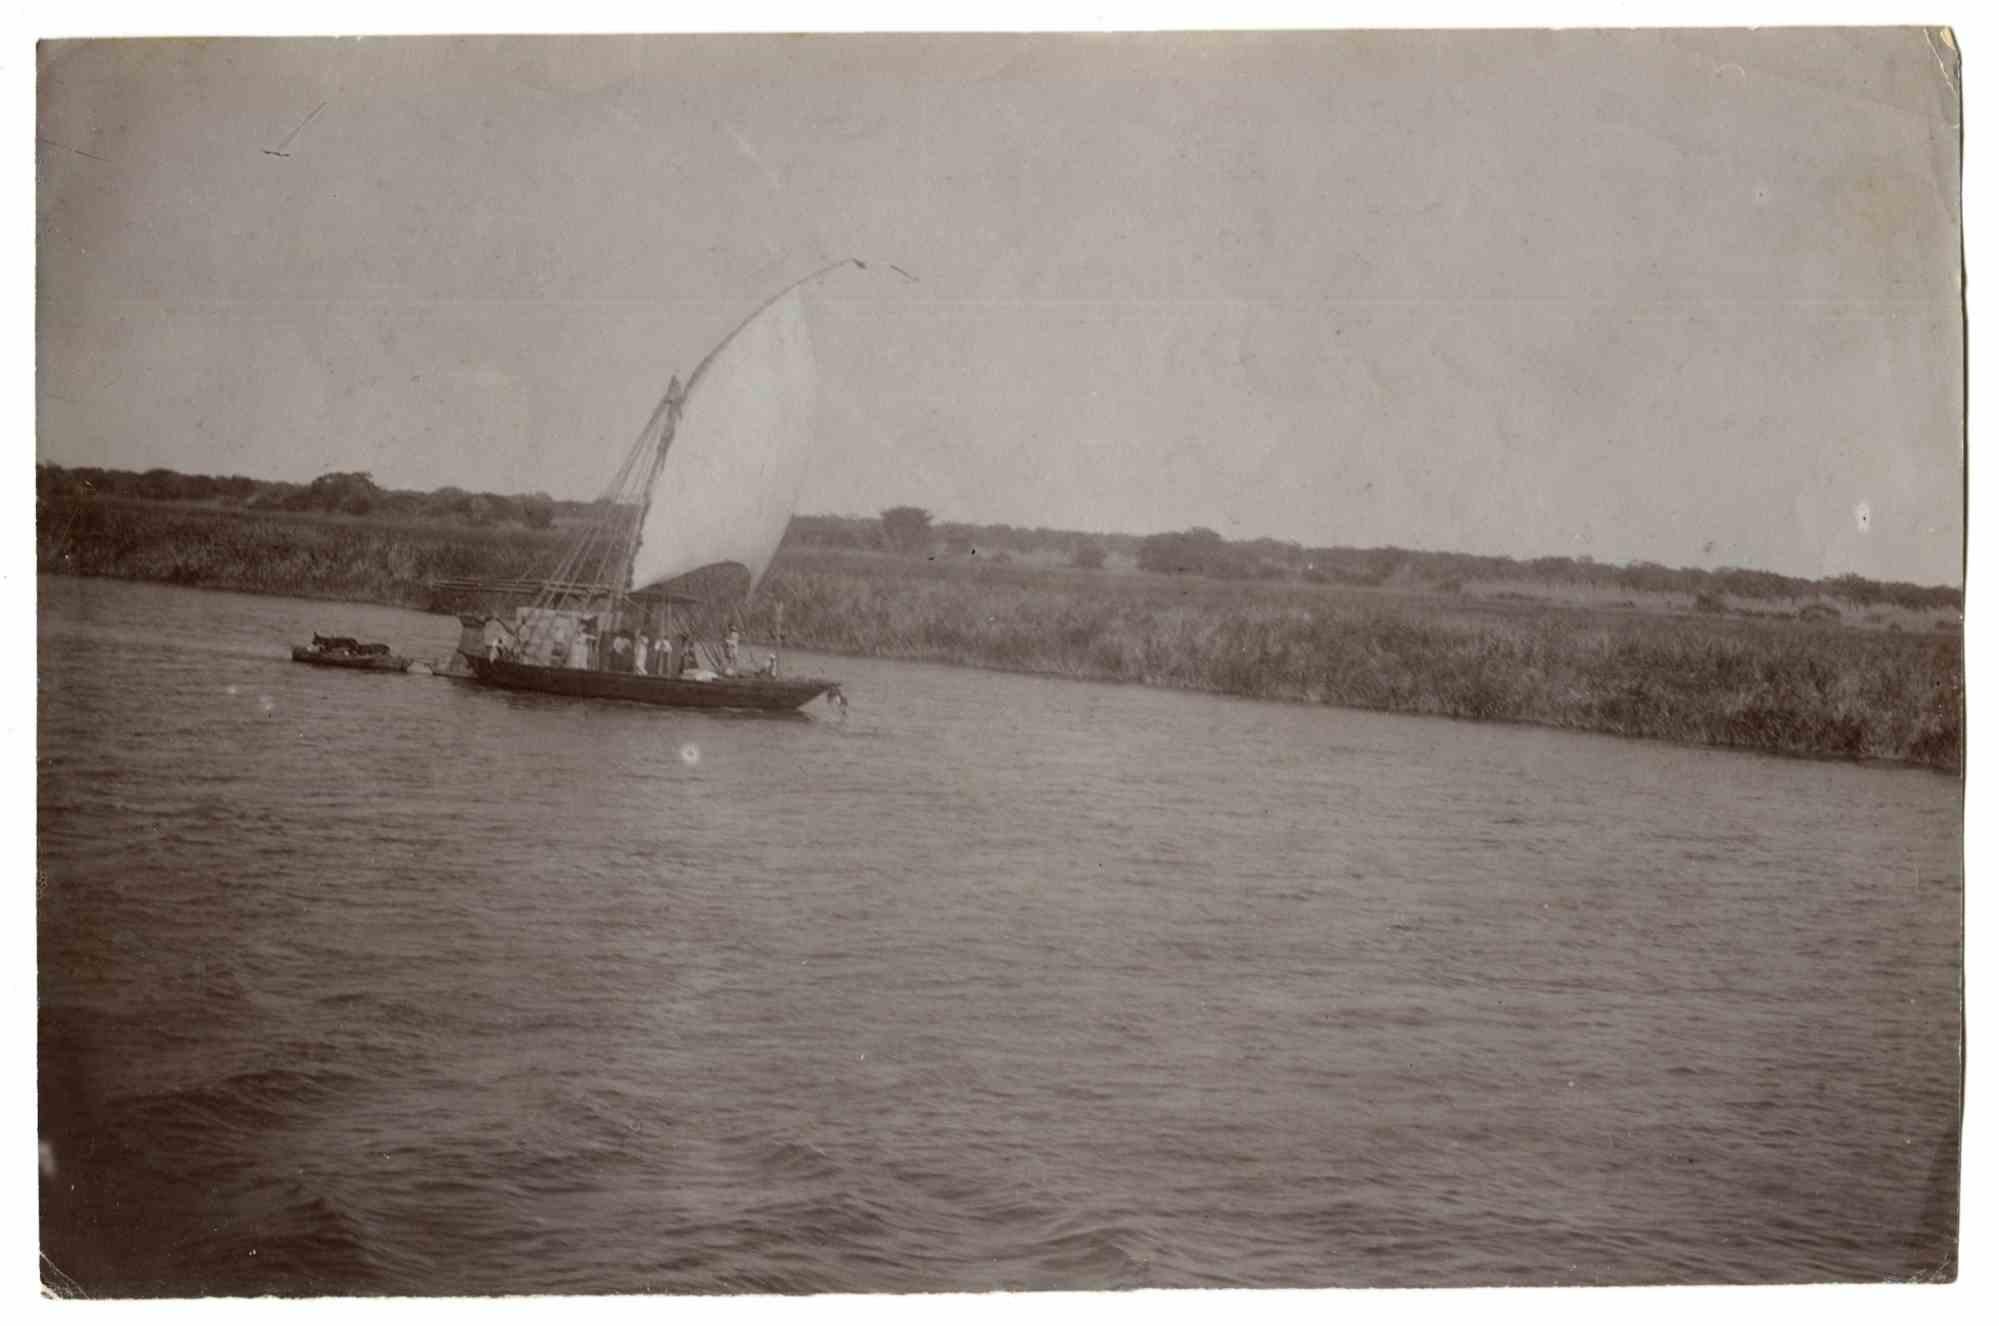 Unknown Figurative Photograph - River in Sudan - Vintage Photo - Early 20th Century